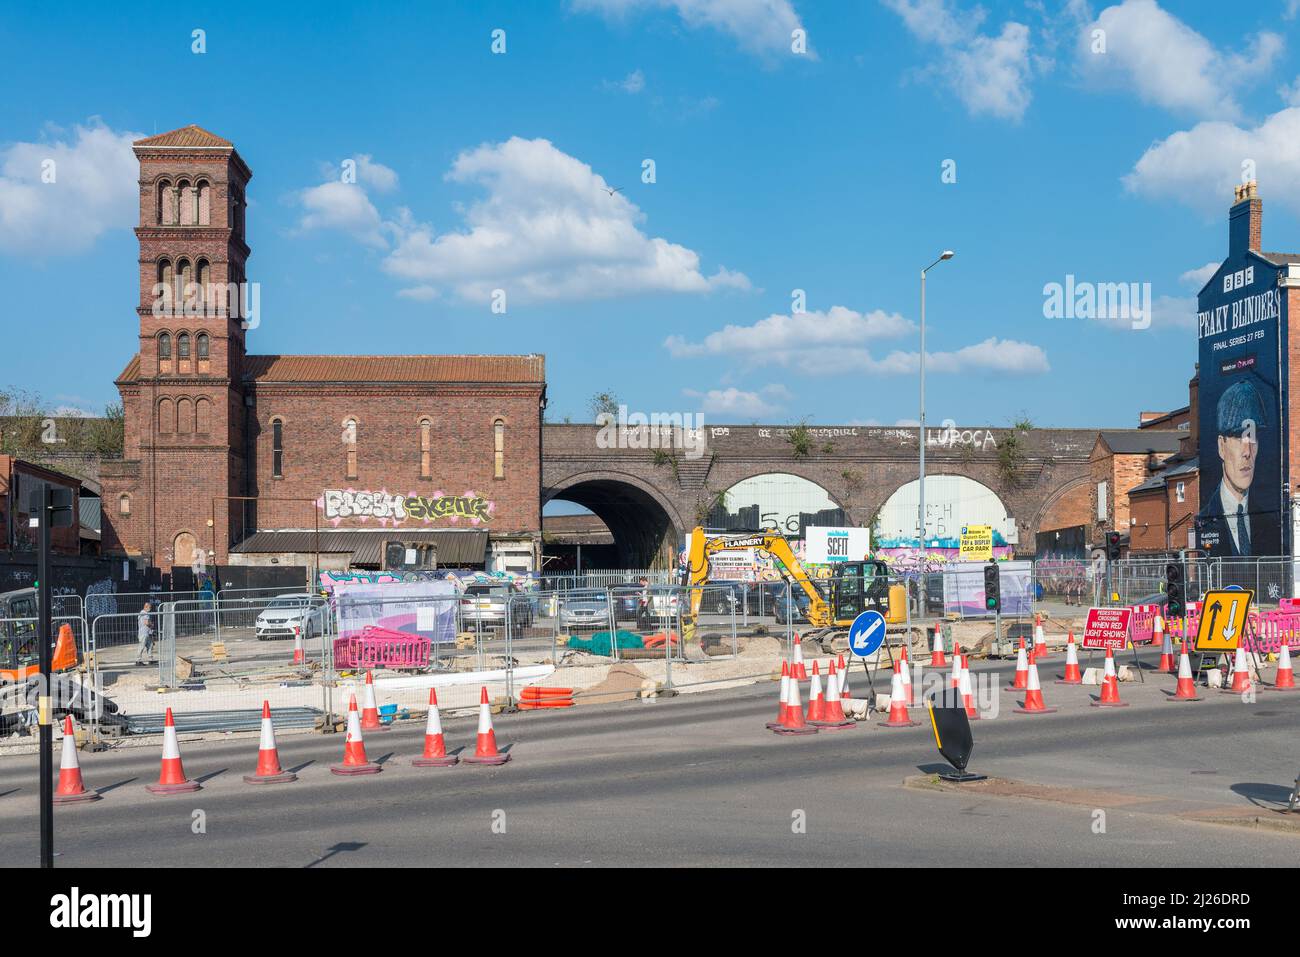 Road works on High Street Deritend, Digbeth, Birmingham as the Midland Metro line is extended Stock Photo